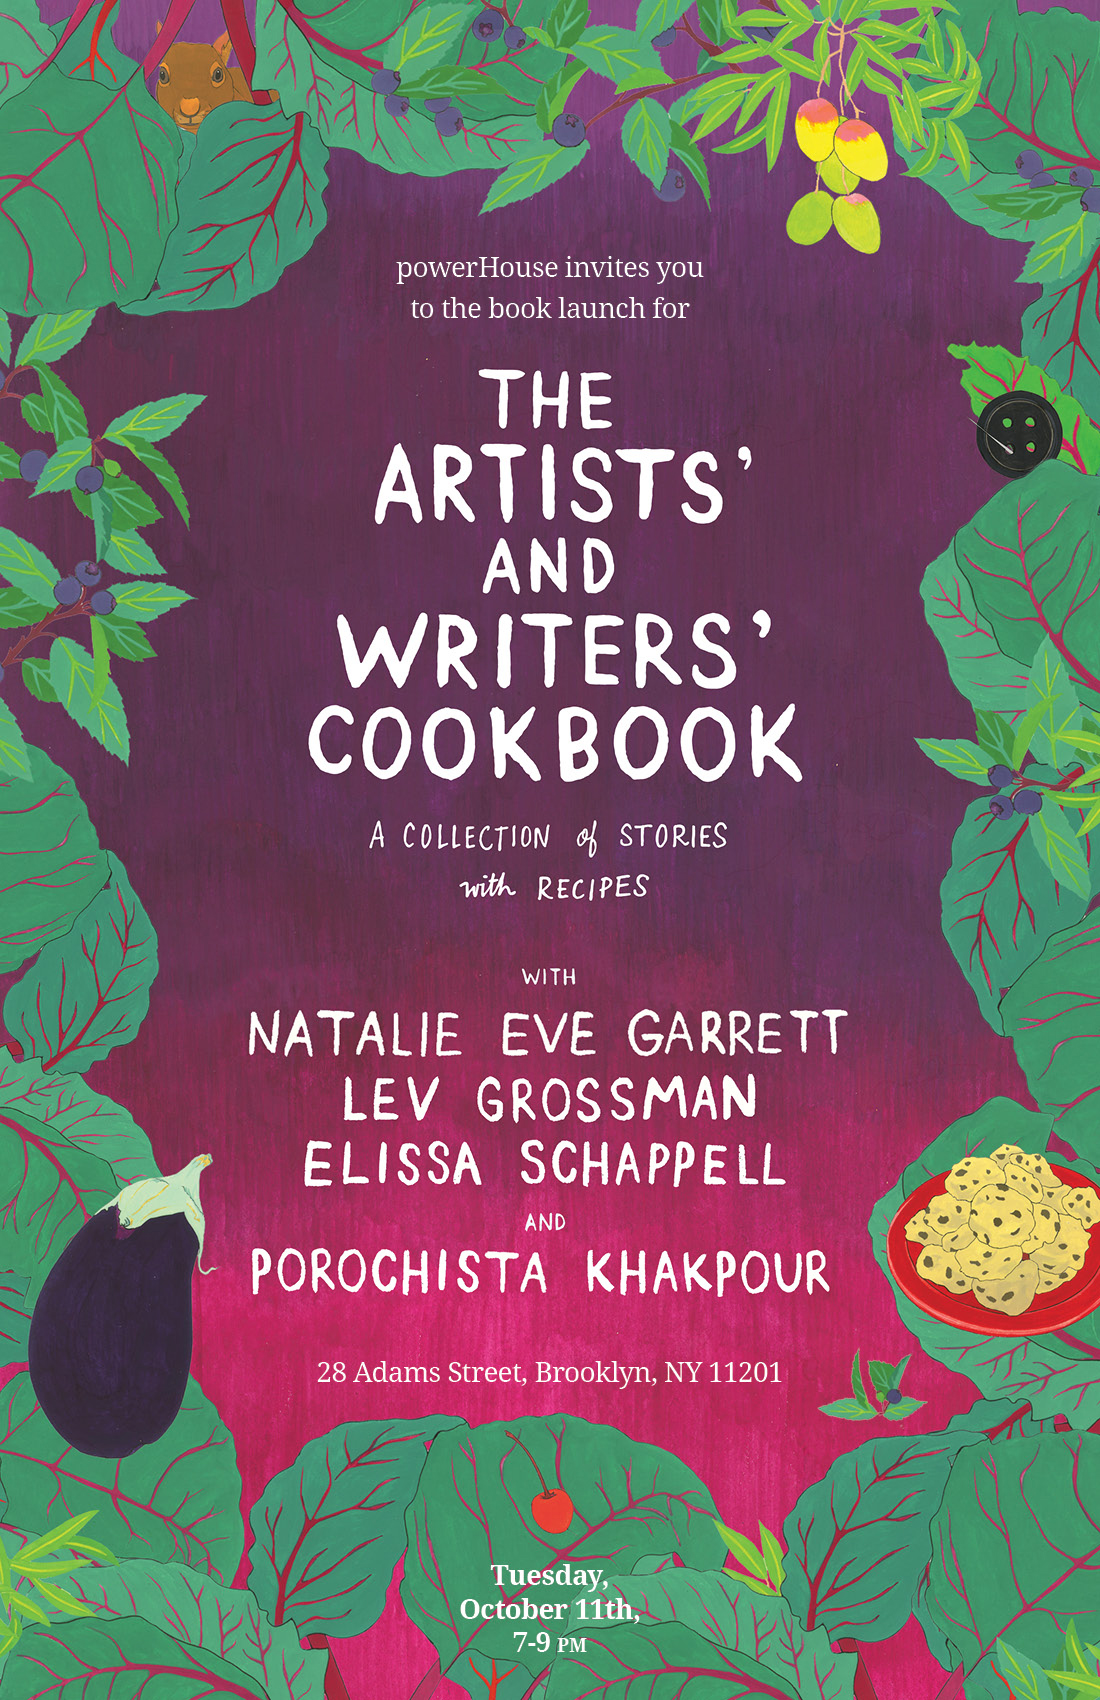 Book Launch: The Artist's and Writers' Cookbook edited by Natalie Eve Garrett with contributors Lev Grossman and Elissa Schappell, moderated by Porochista Khakpour